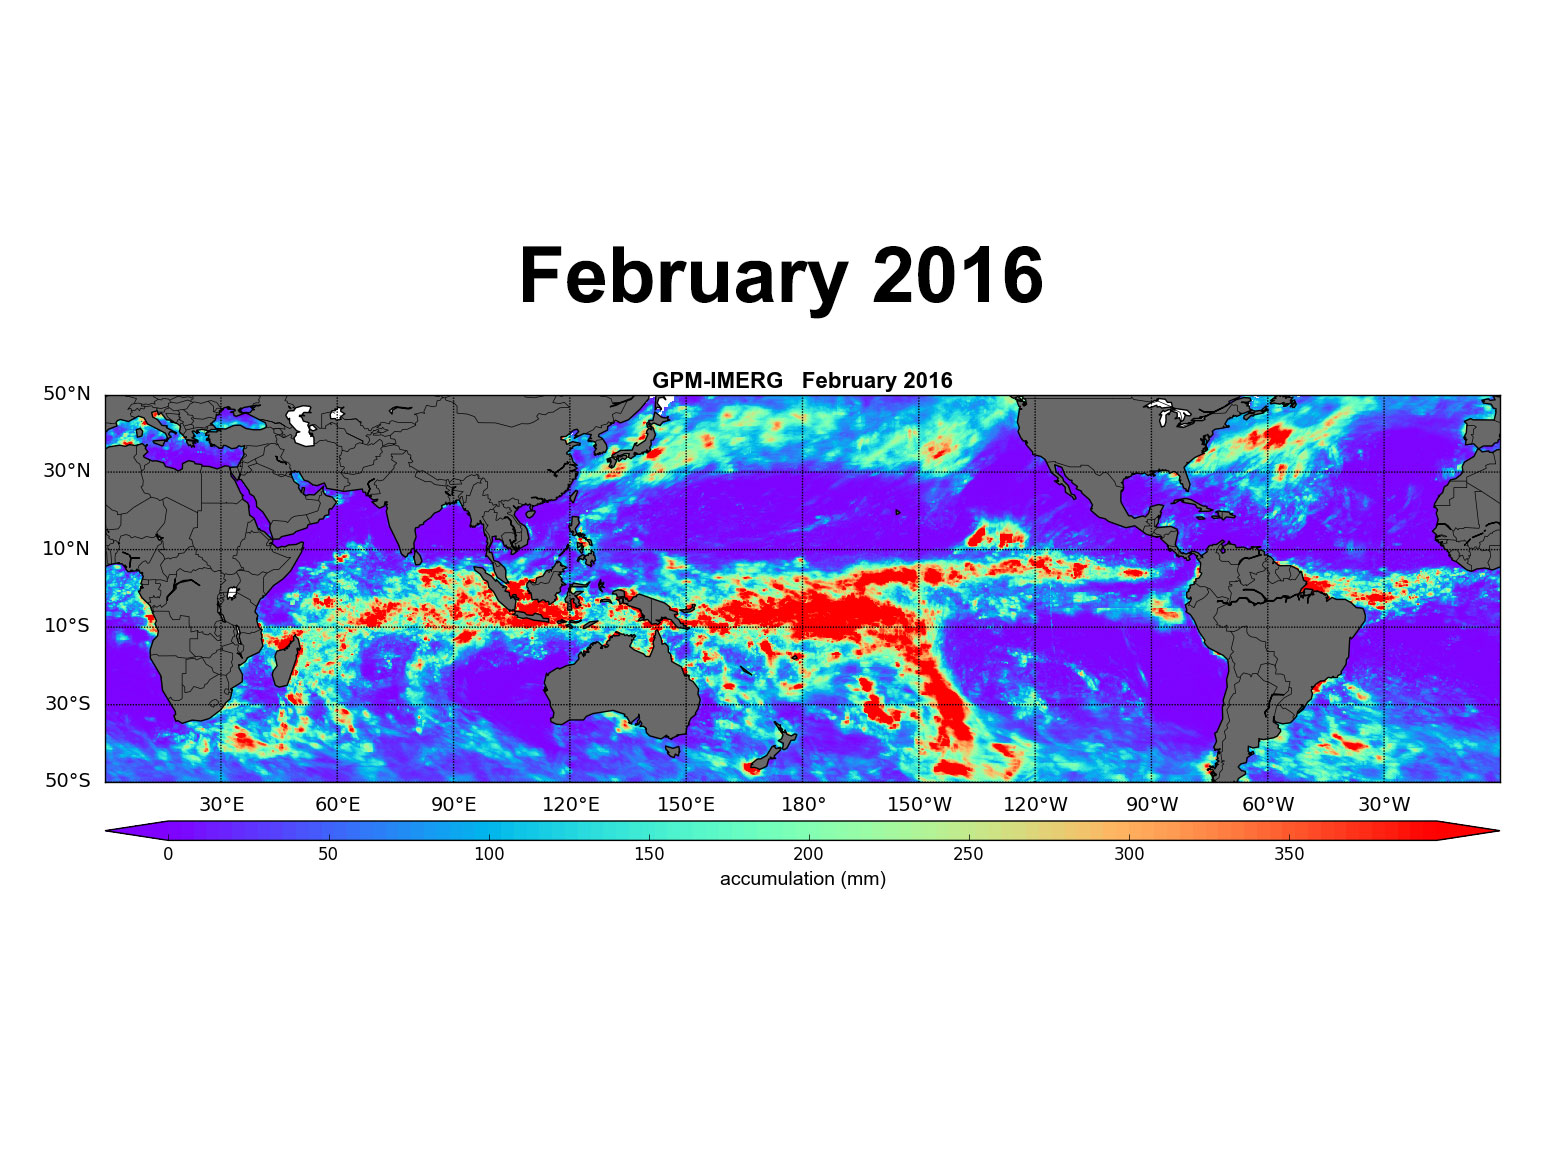 Monthly oceanic precipitation totals (in millimeters) 